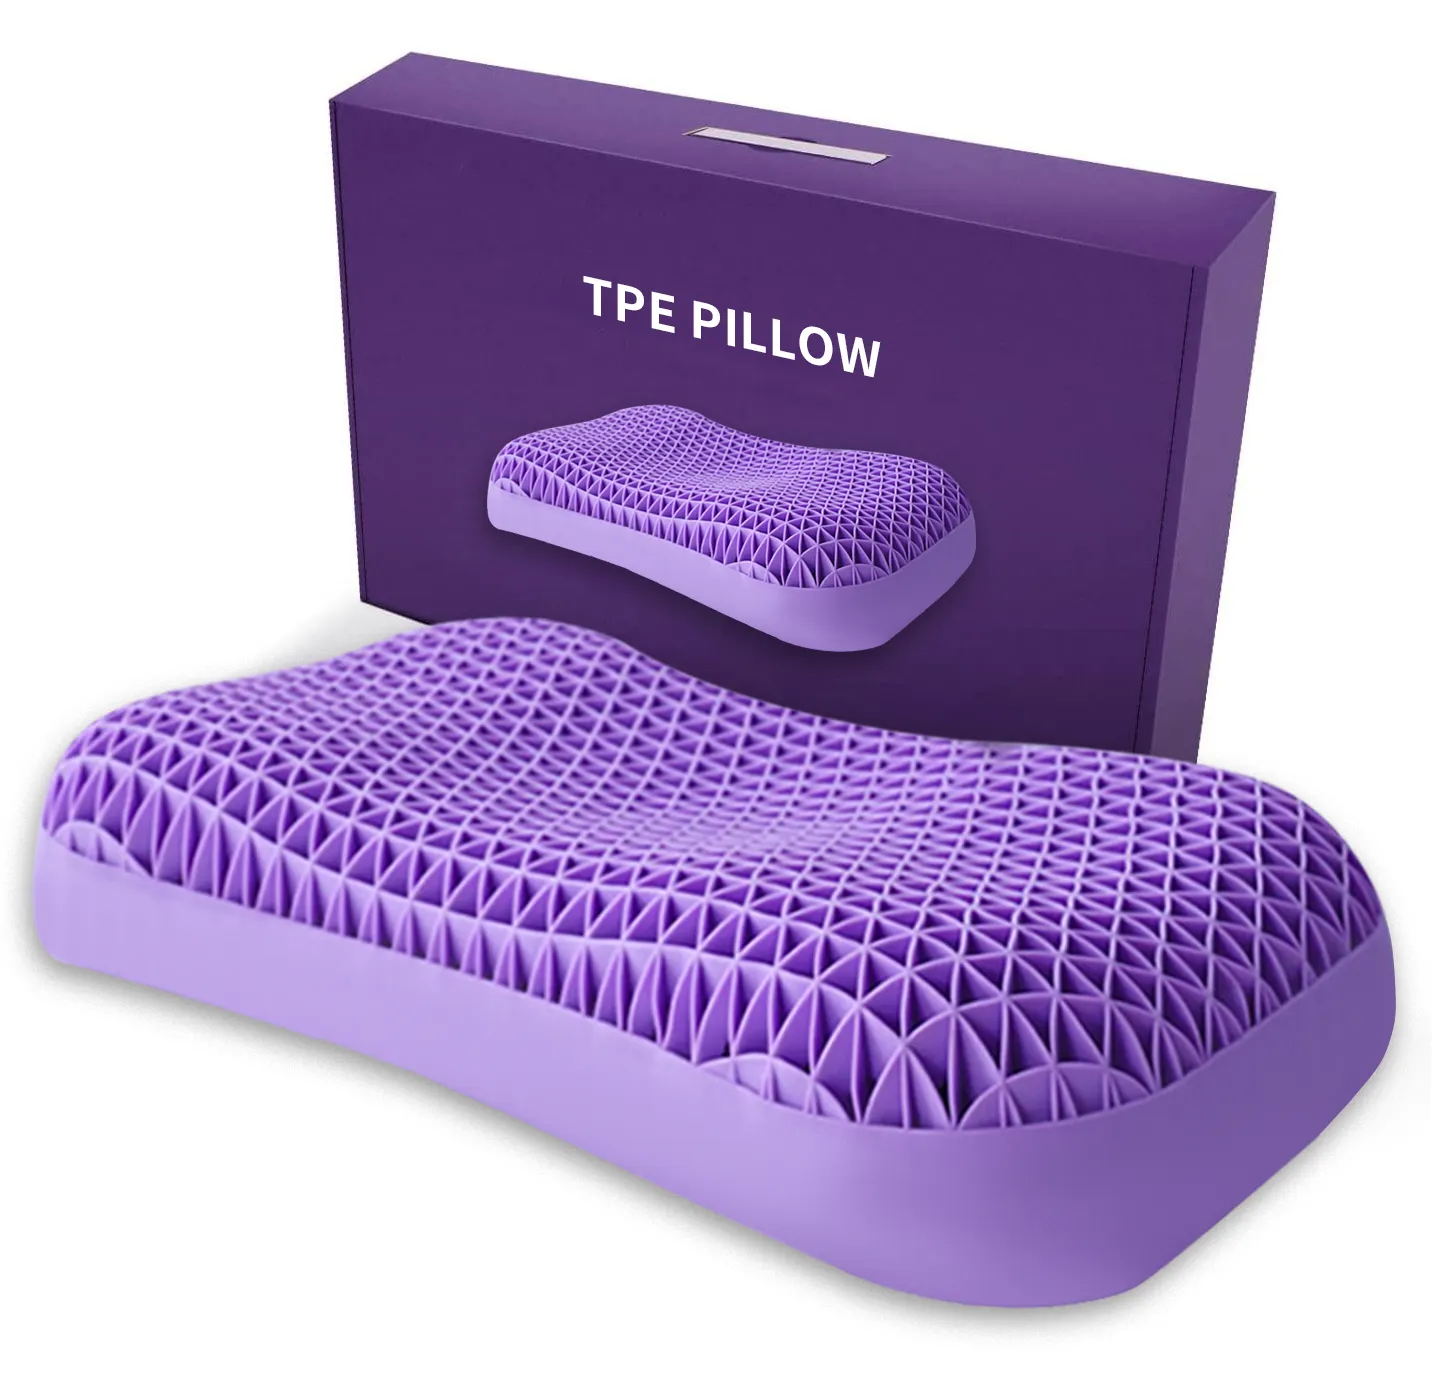 Professional Home Furniture Purple TPE Cooling Memory Massage Silicone Ergonomic Contour Neck Bed Pillows for Bedroom